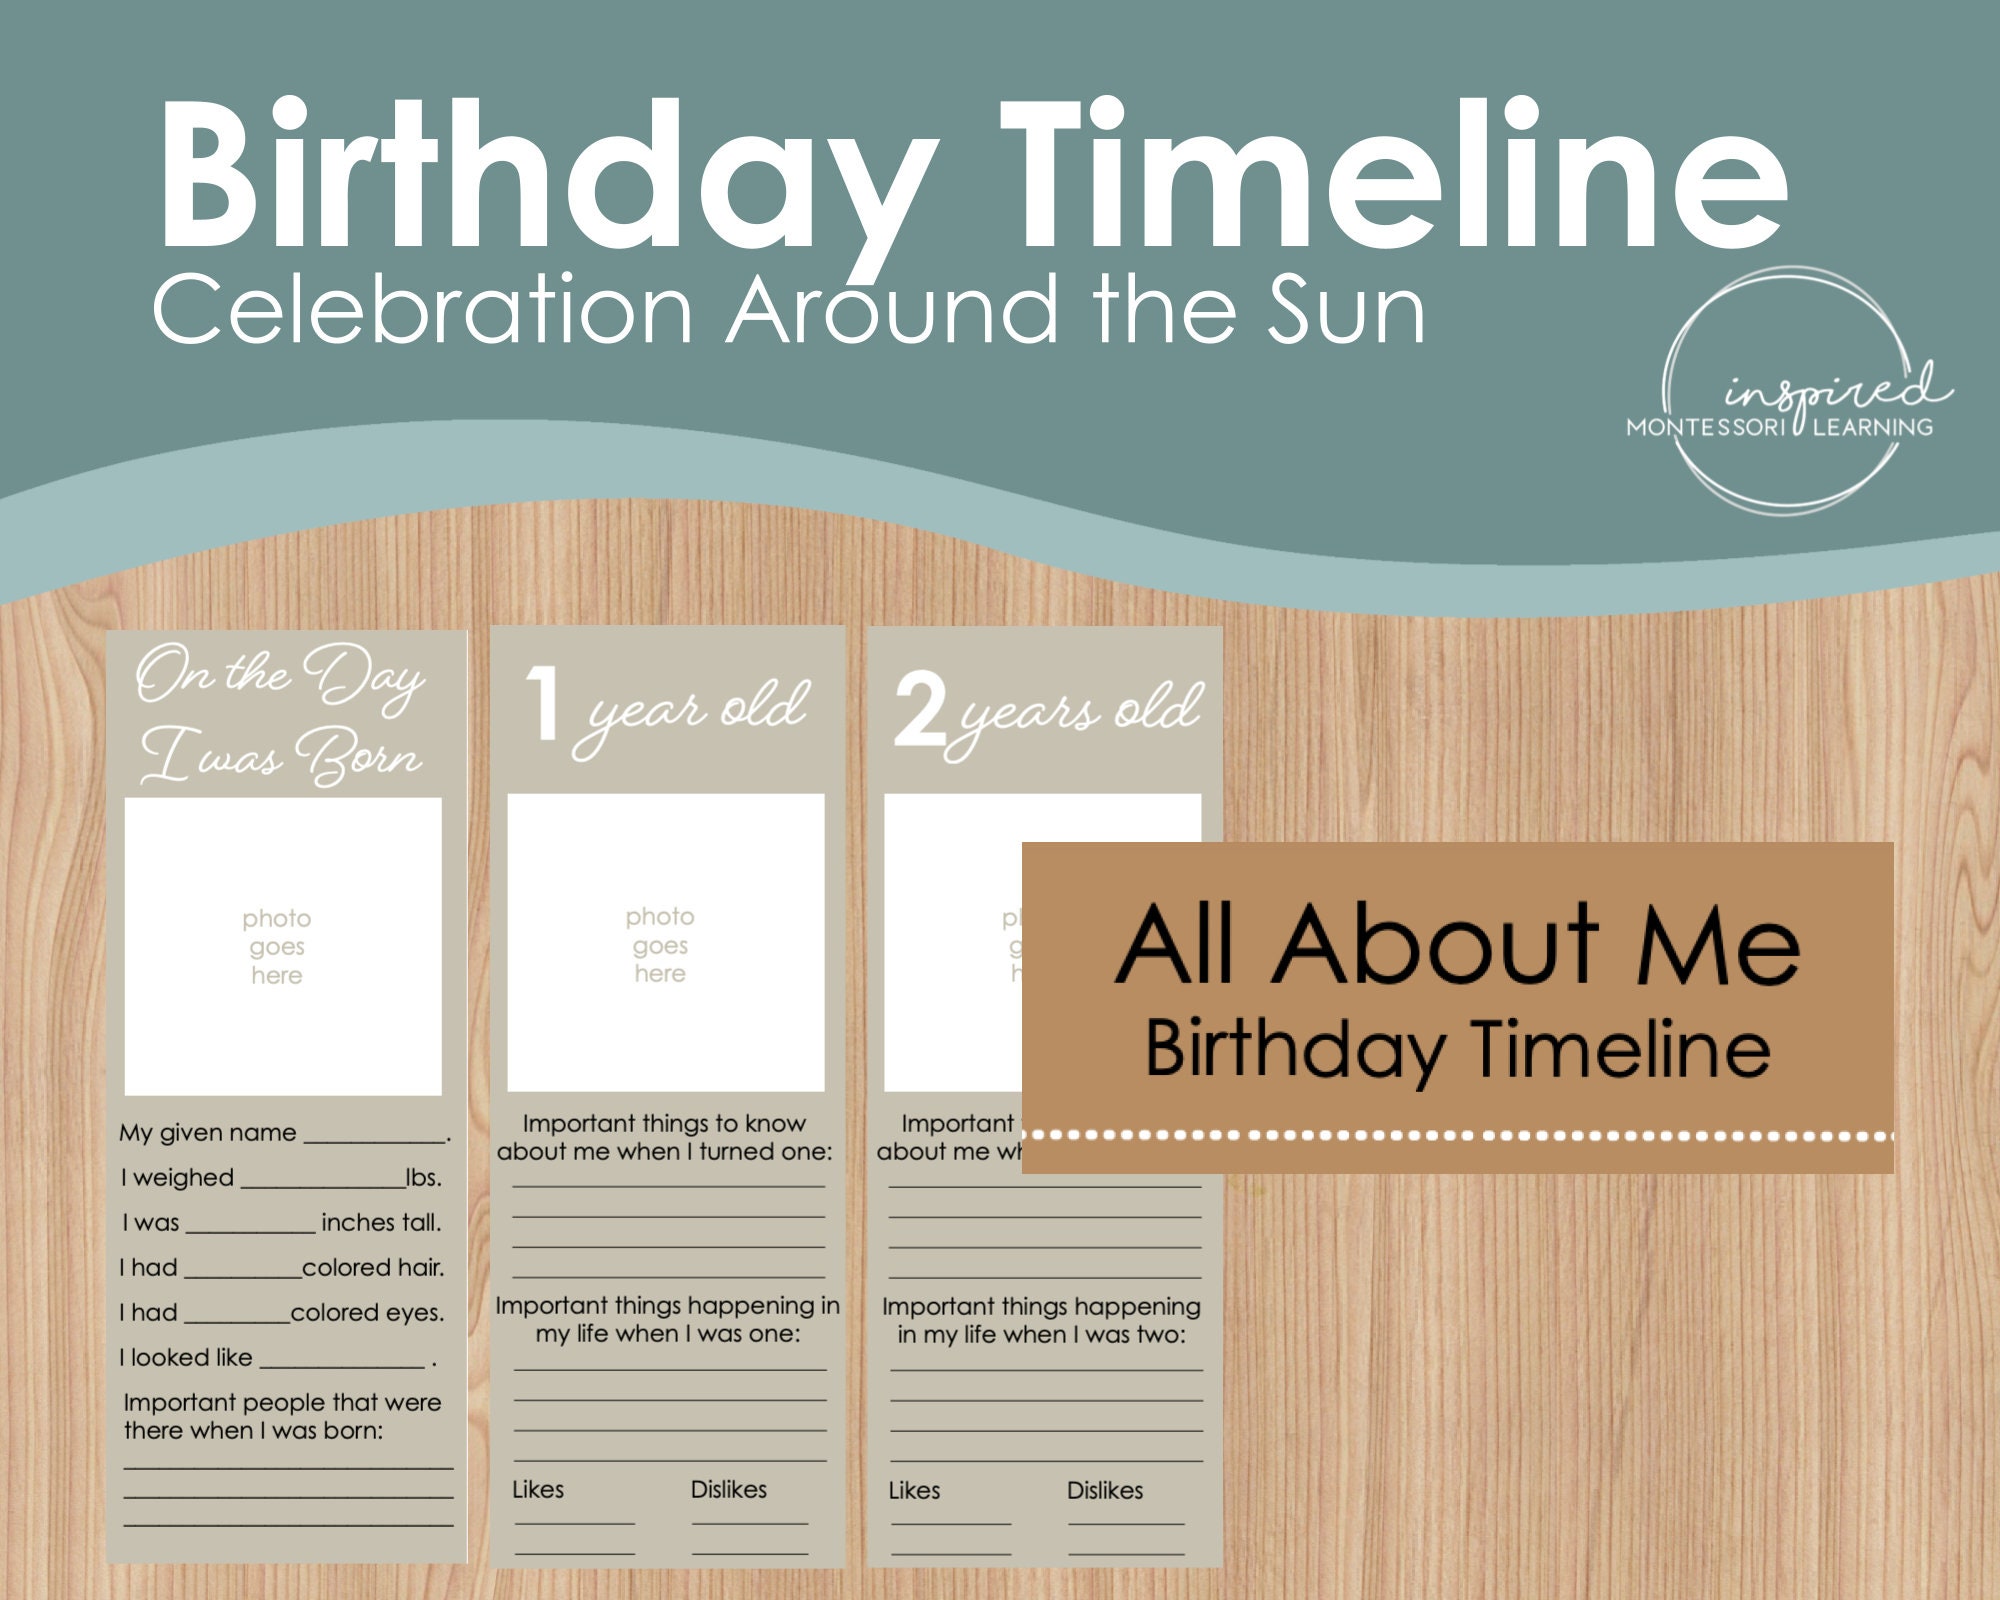 Check the Timeline - How to Find the Perfect Birthday Gift (Even for the Trickiest Folks!)